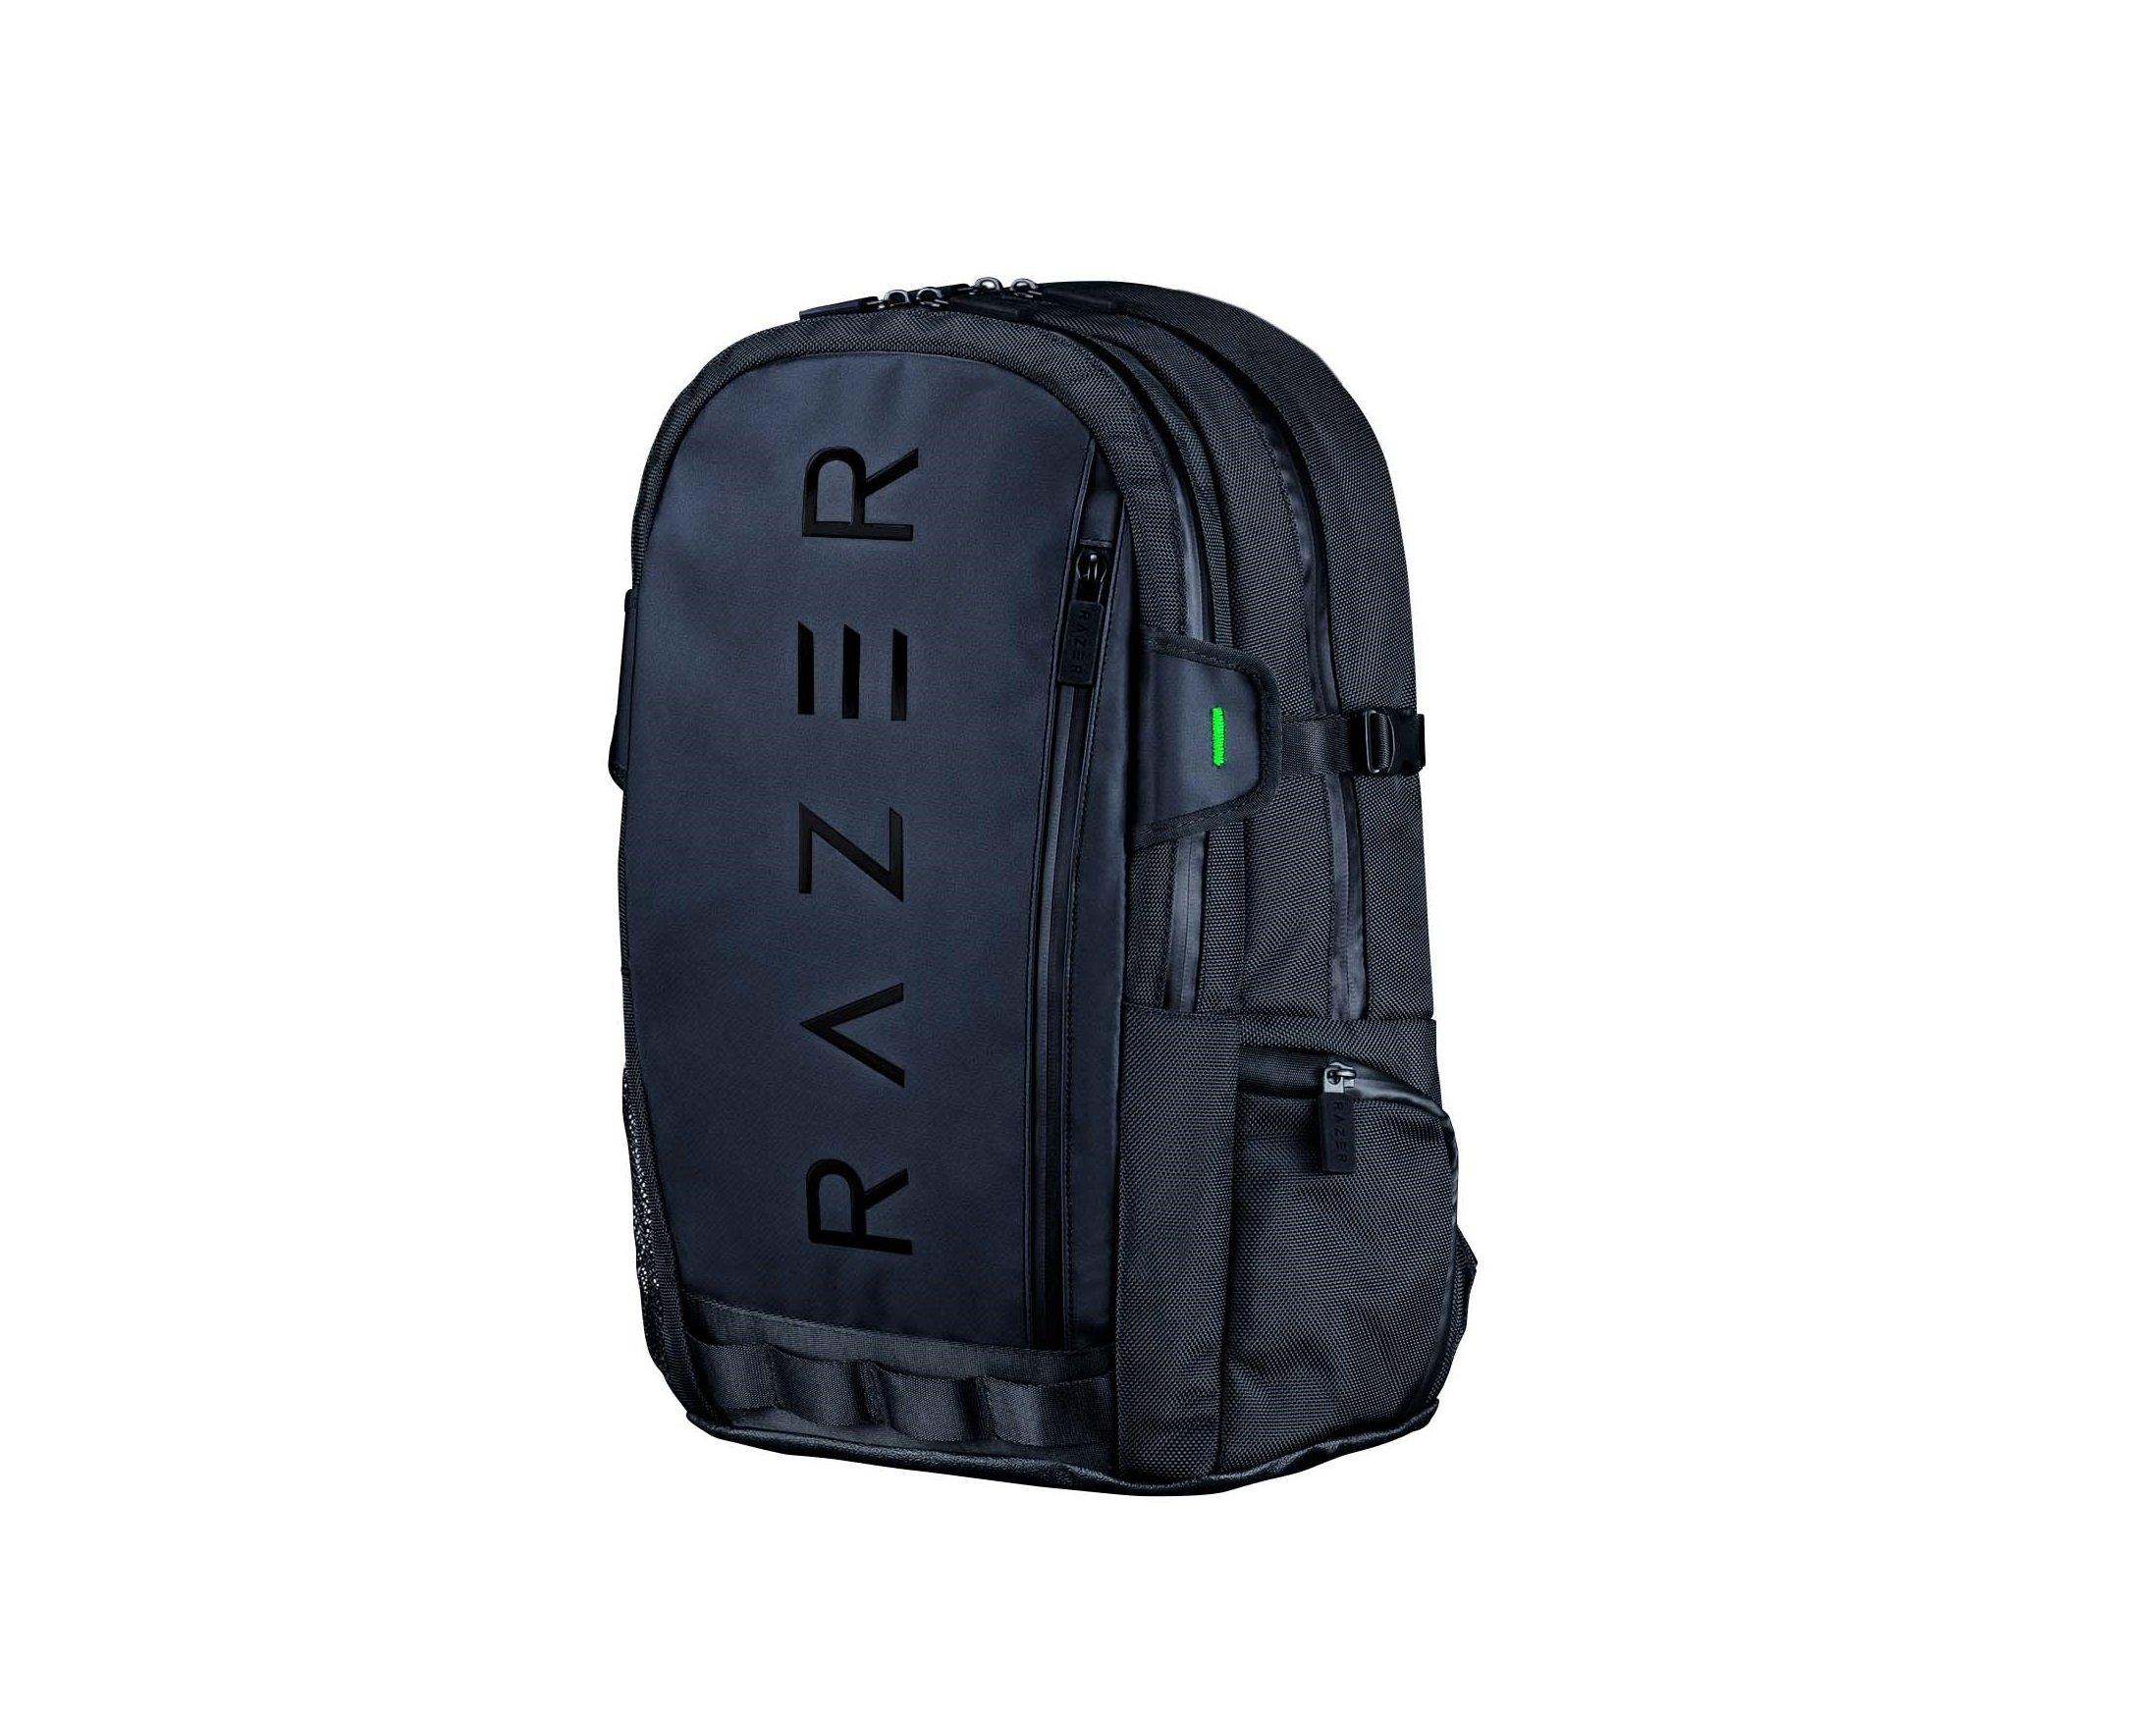 The Rogue Backpack